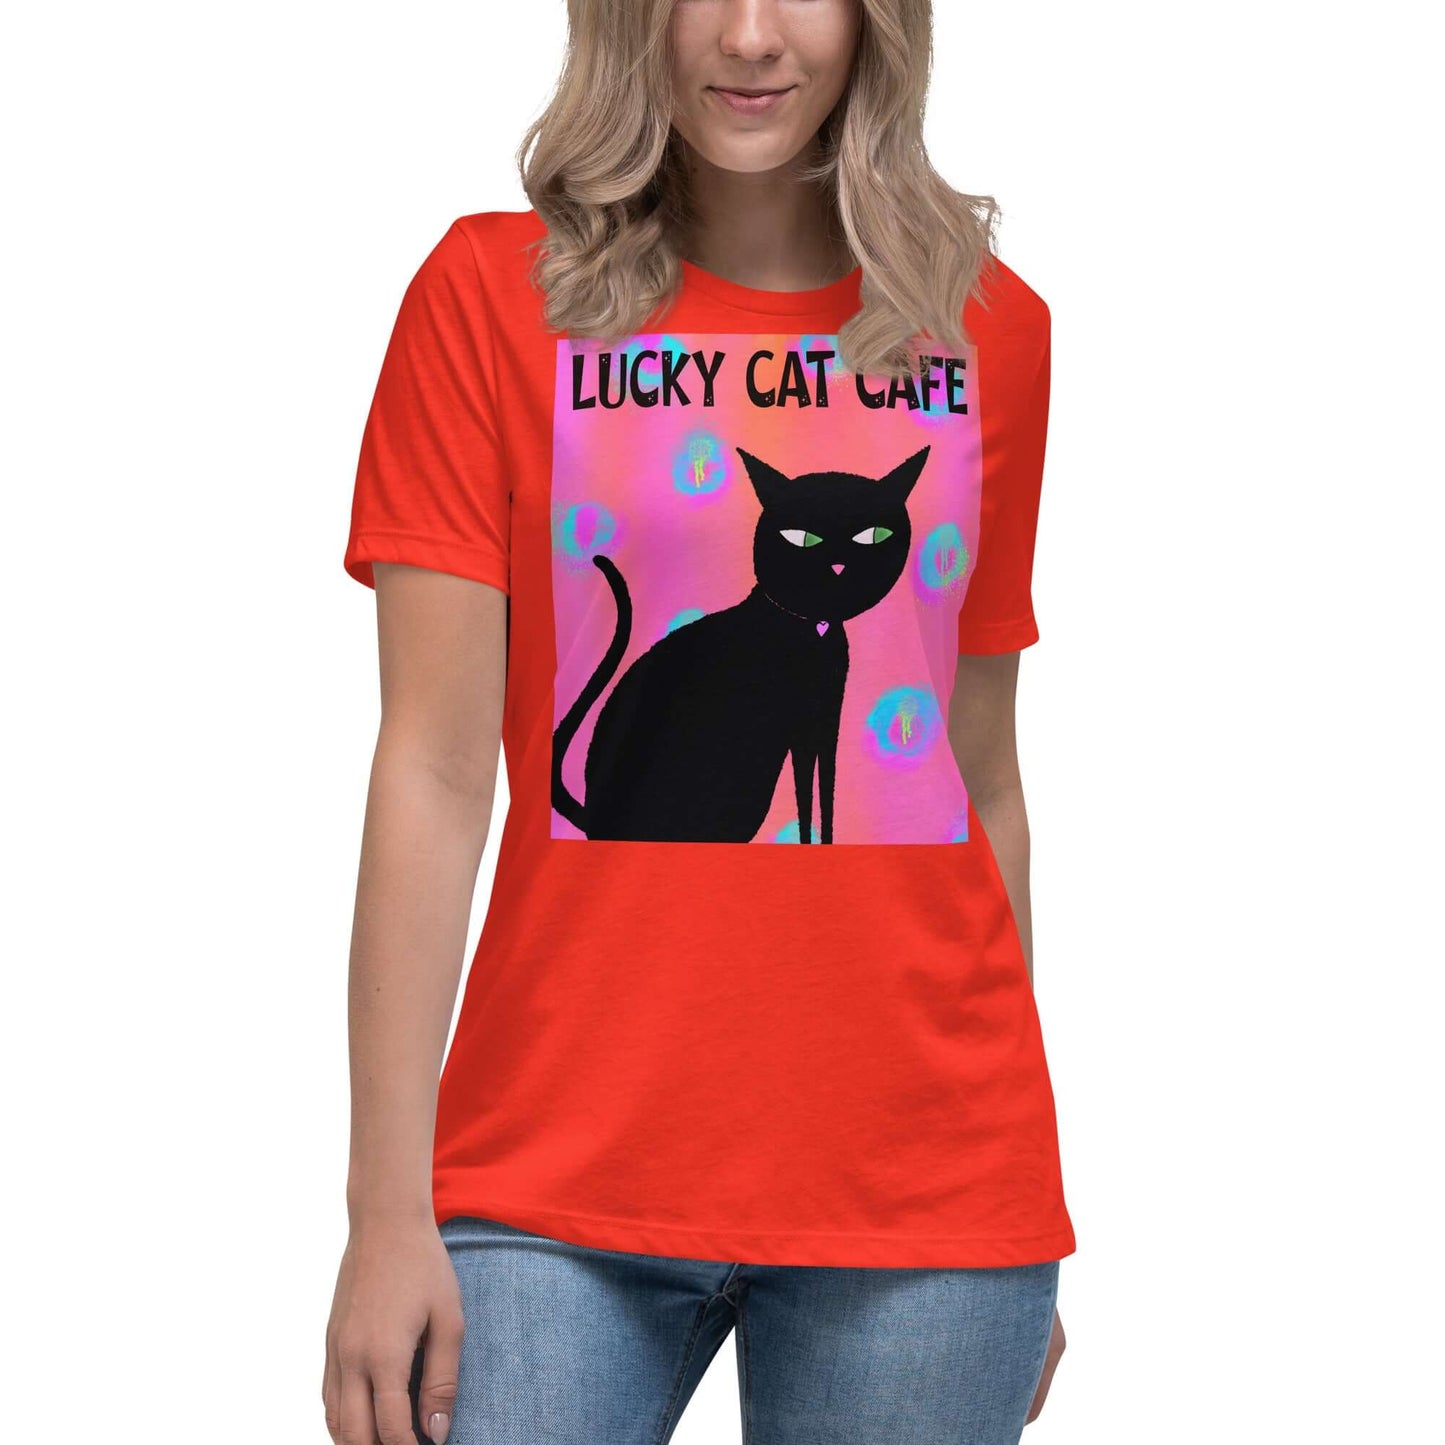 Black Cat on Hot Pink Tie Dye Background with Text “Lucky Cat Cafe” Women’s Short Sleeve Tee in Poppy